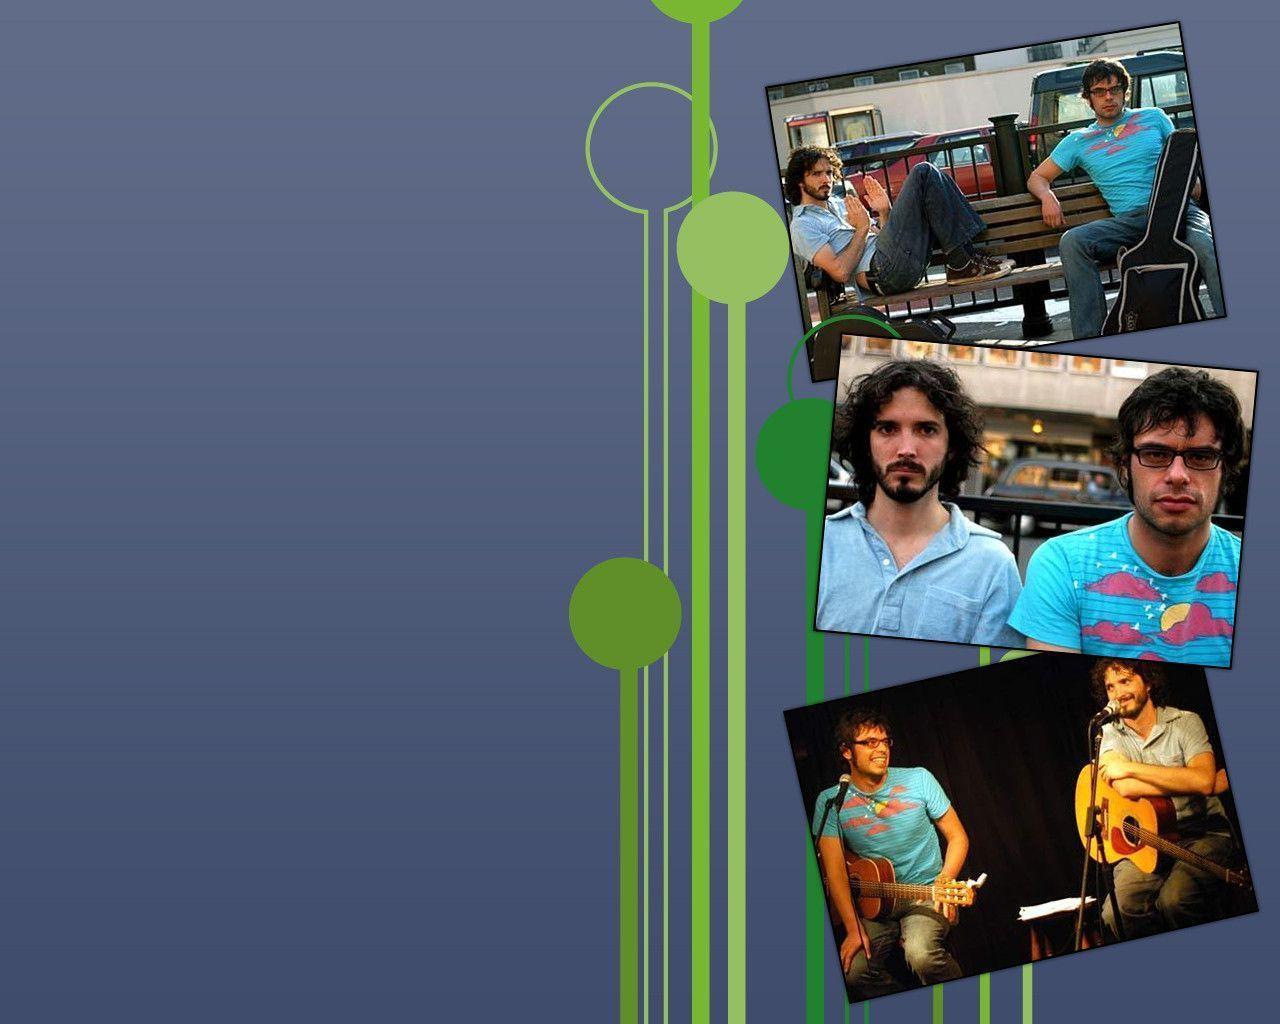 Flight Of The Conchords Wallpaper